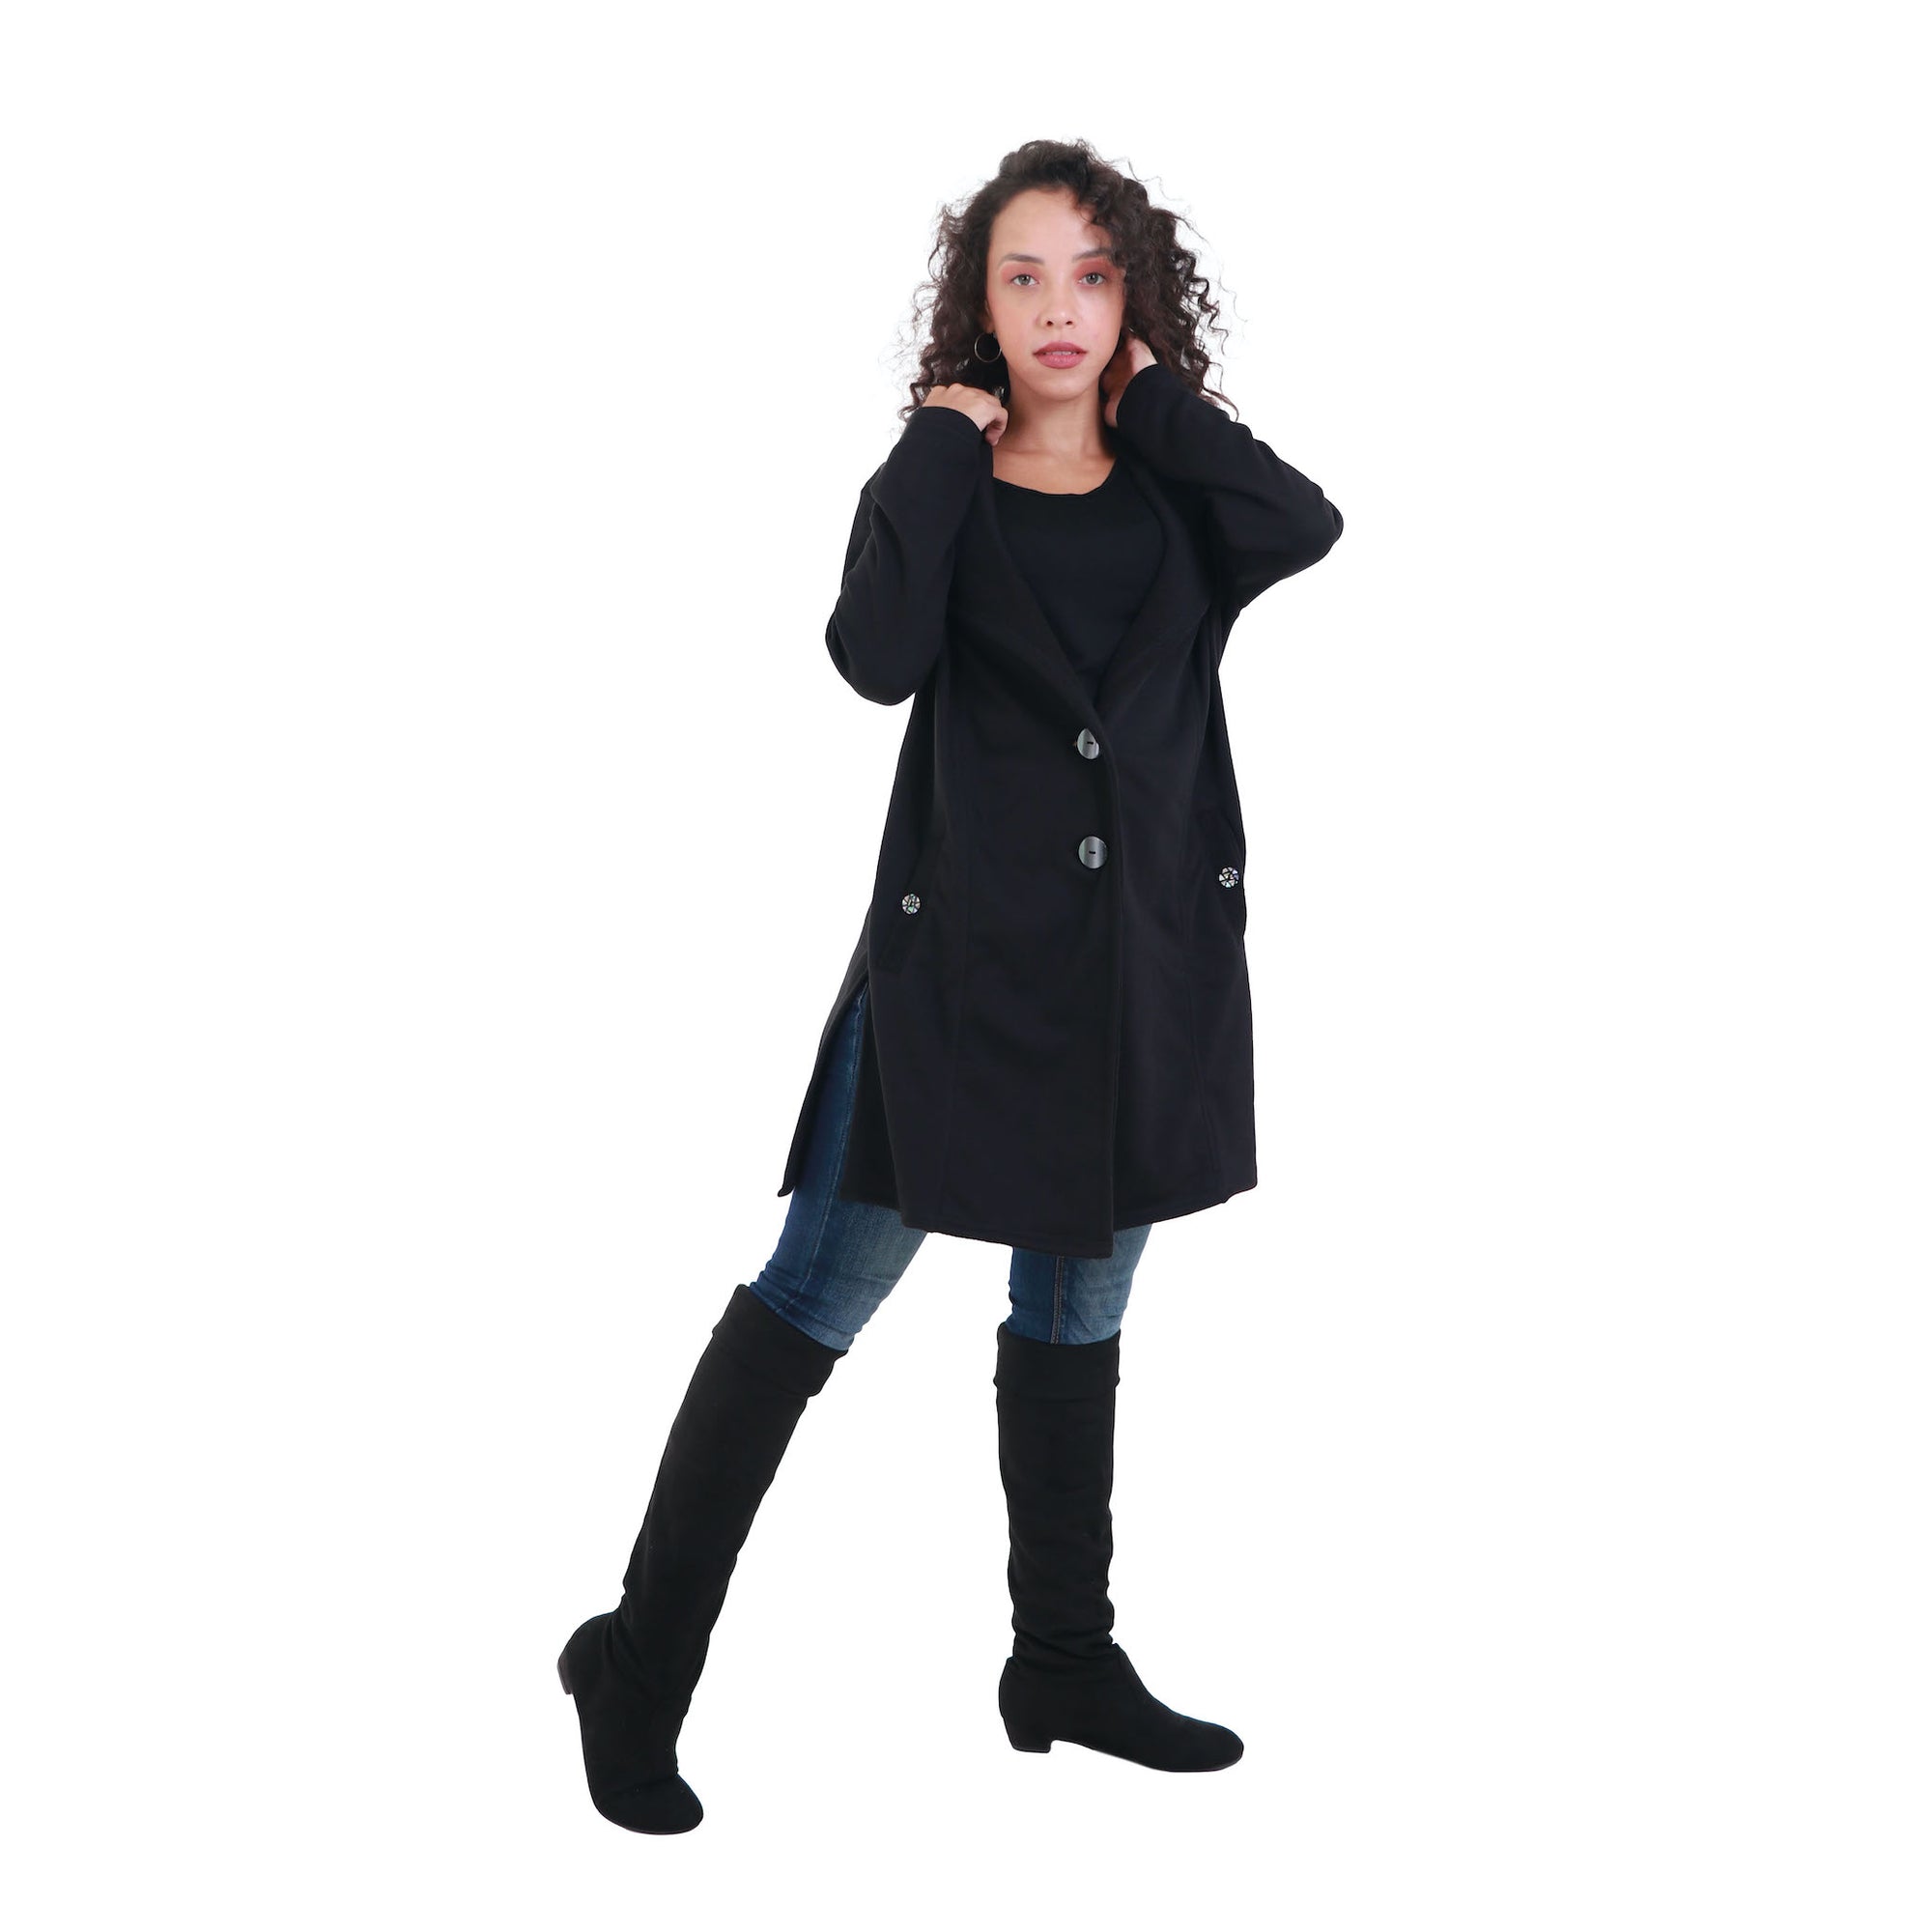 fair trade organic cotton winter coats - made ethical with sustainable materials | free shipping guarantee 